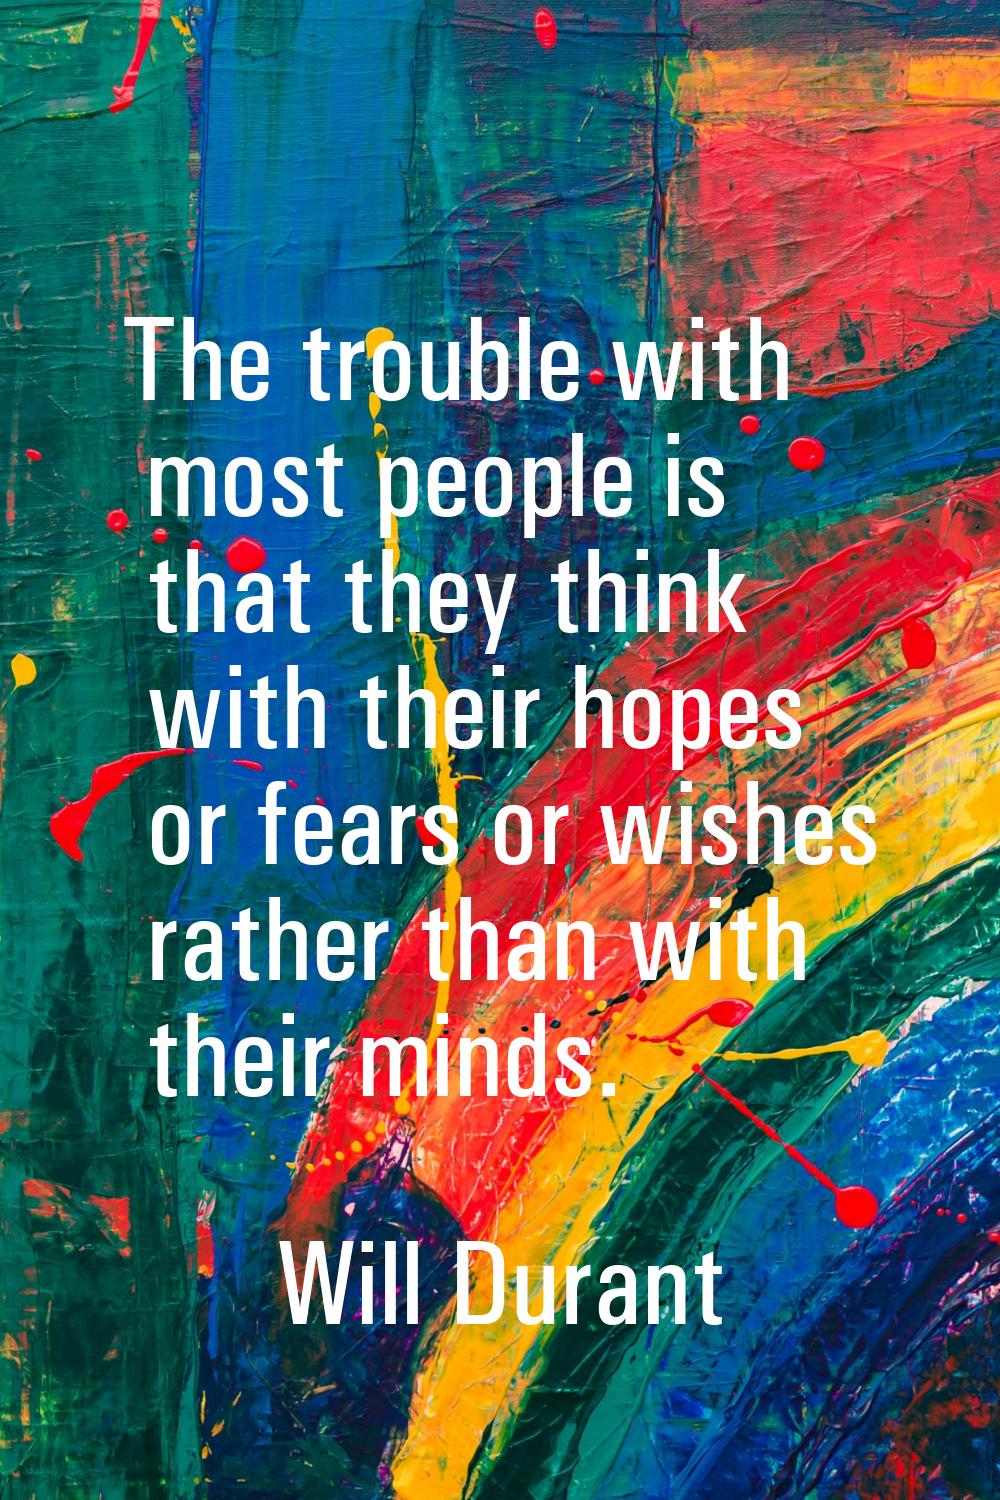 The trouble with most people is that they think with their hopes or fears or wishes rather than wit